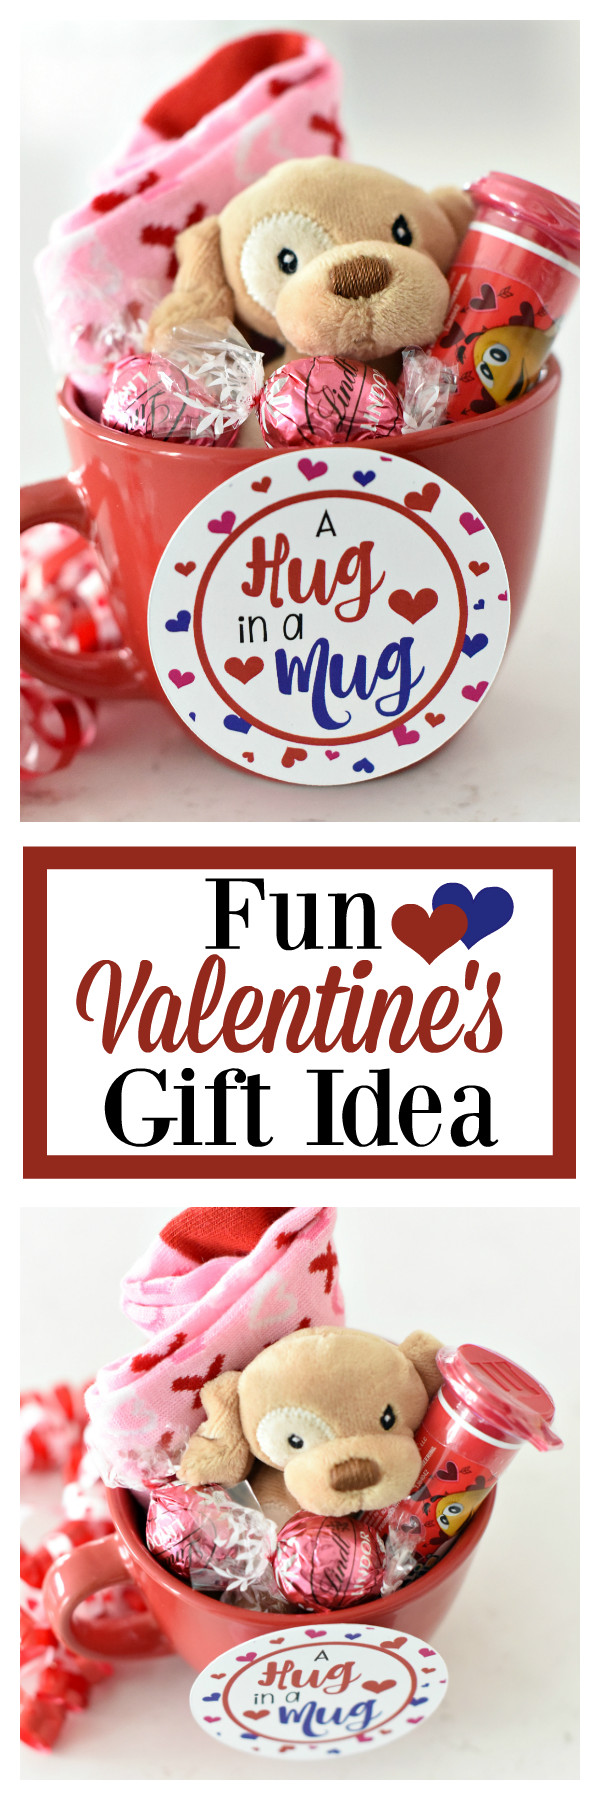 Funny Kids Gifts
 Fun Valentines Gift Idea for Kids – Fun Squared